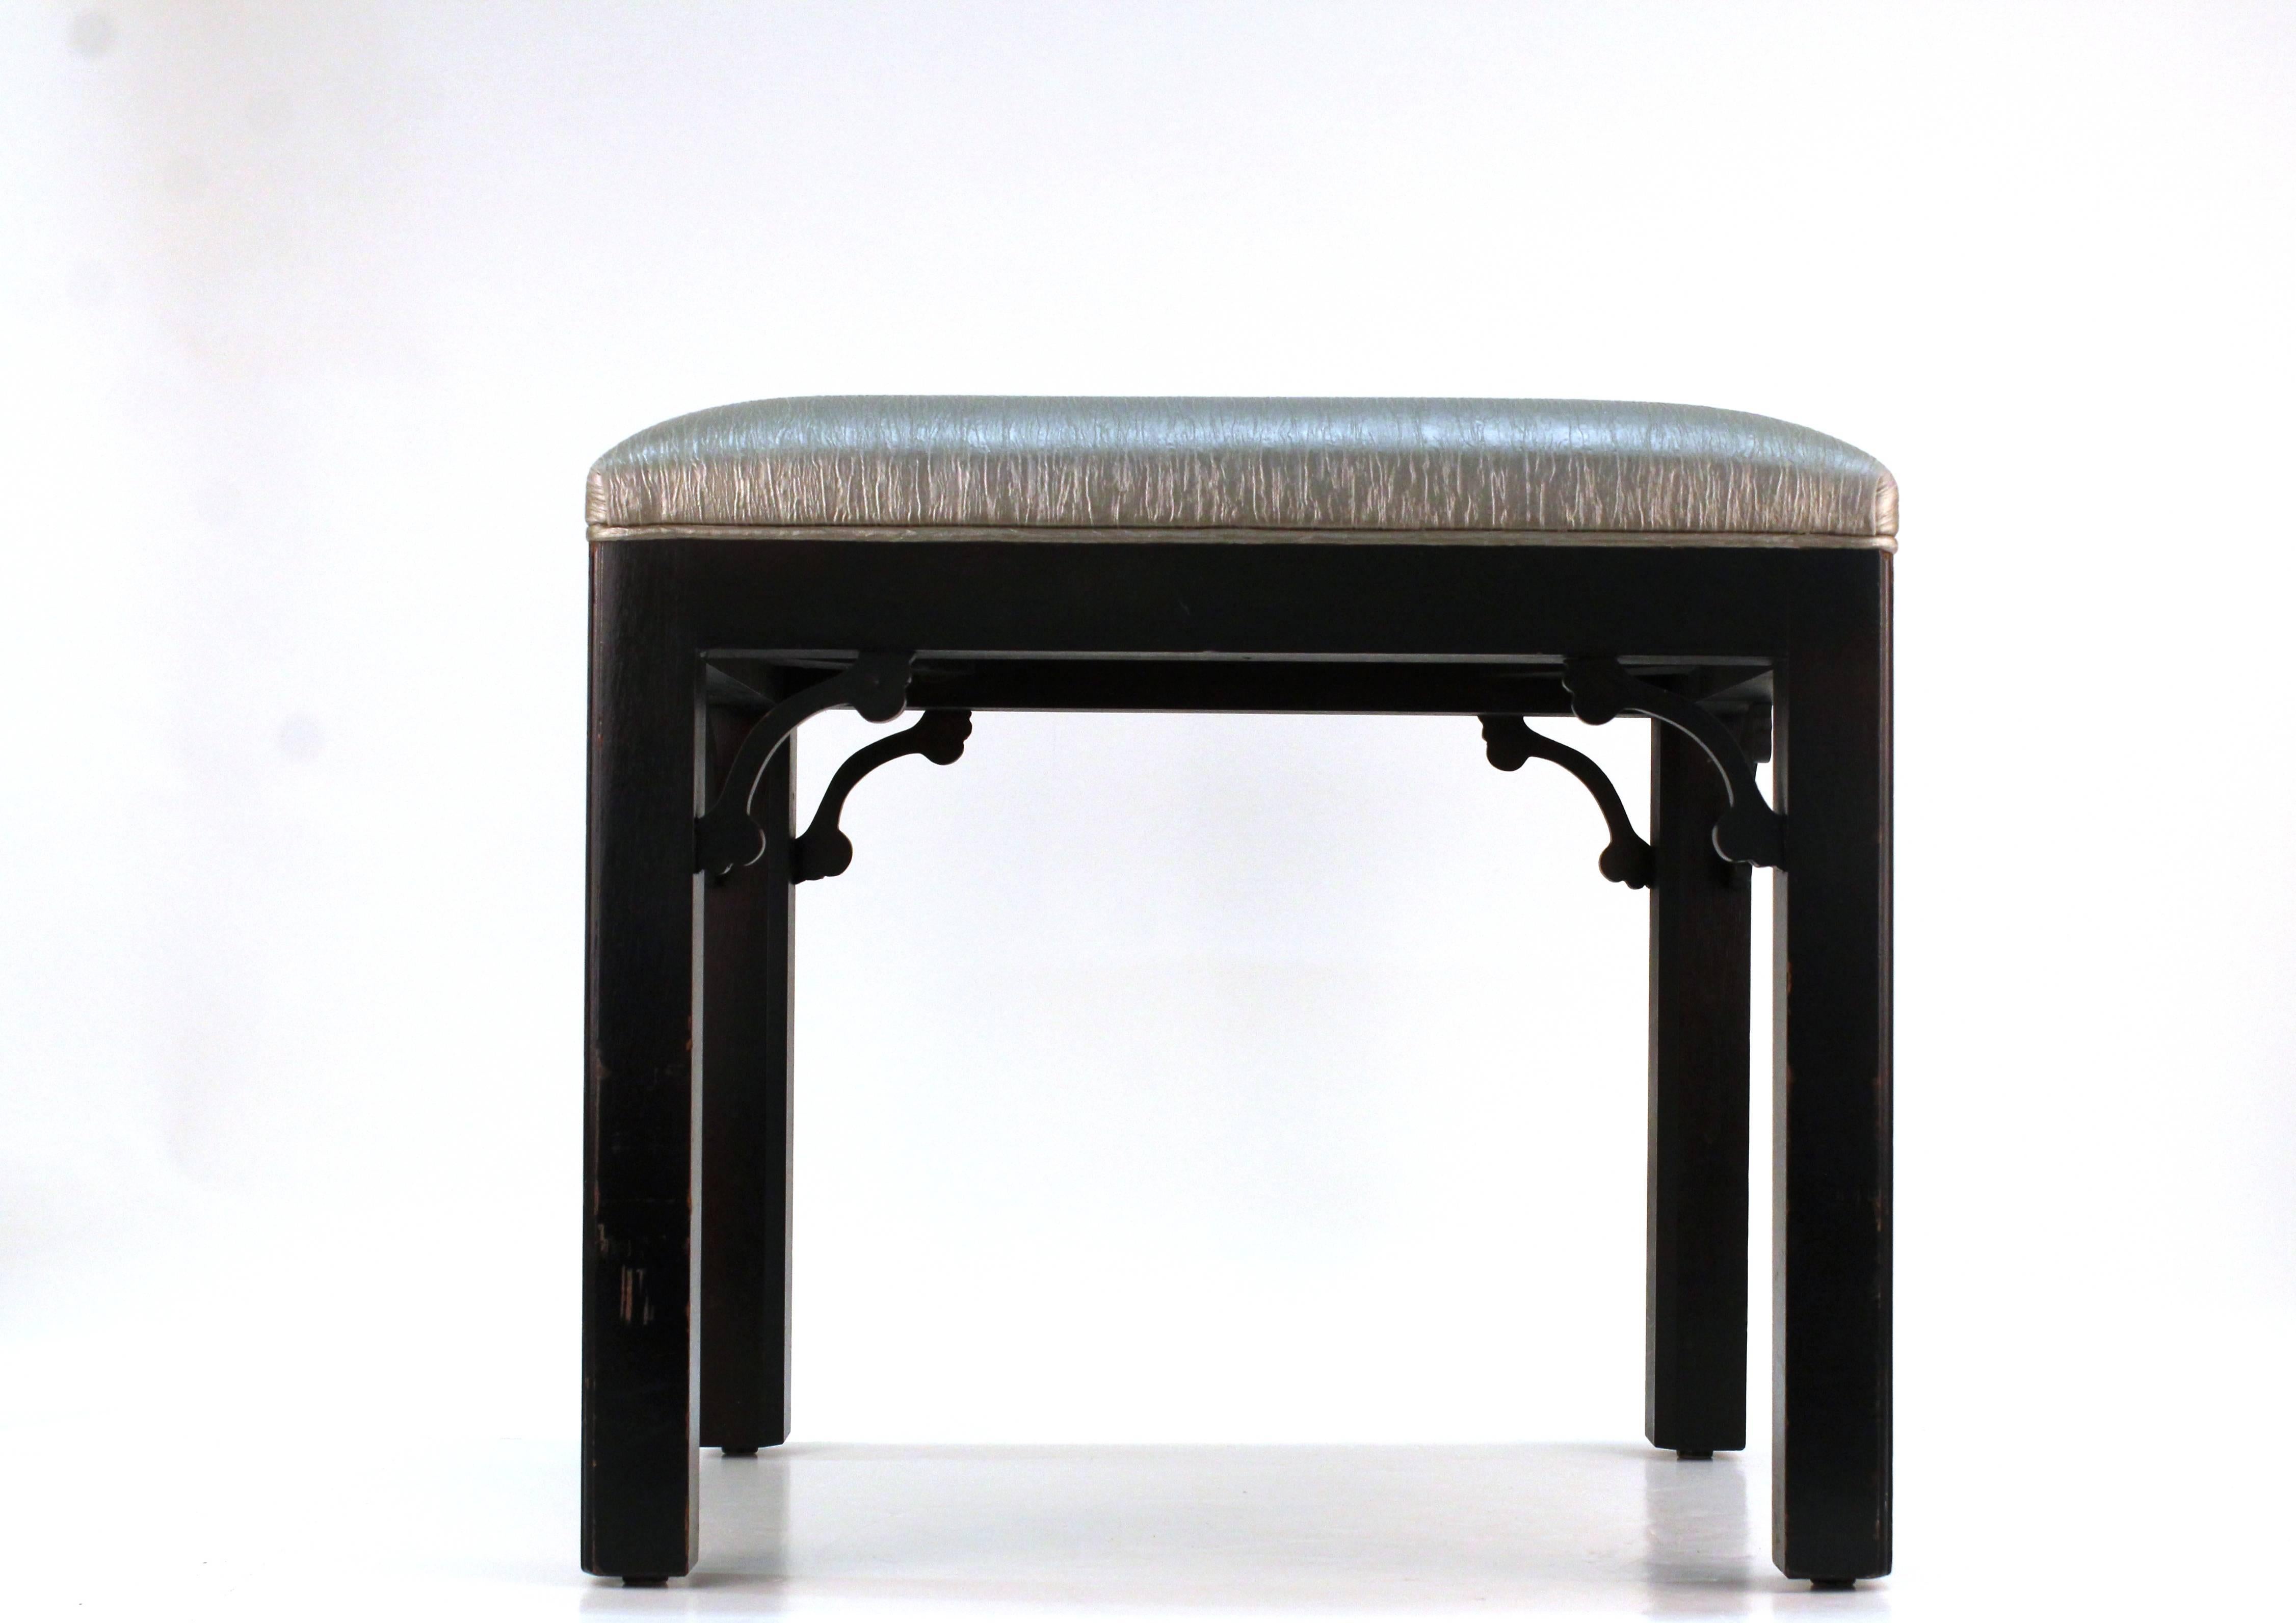 An four legged stool with Asian inspired motif. Produced in black painted wood and includes iridescent silver upholstery. Some wear appropriate to use but in good condition. 